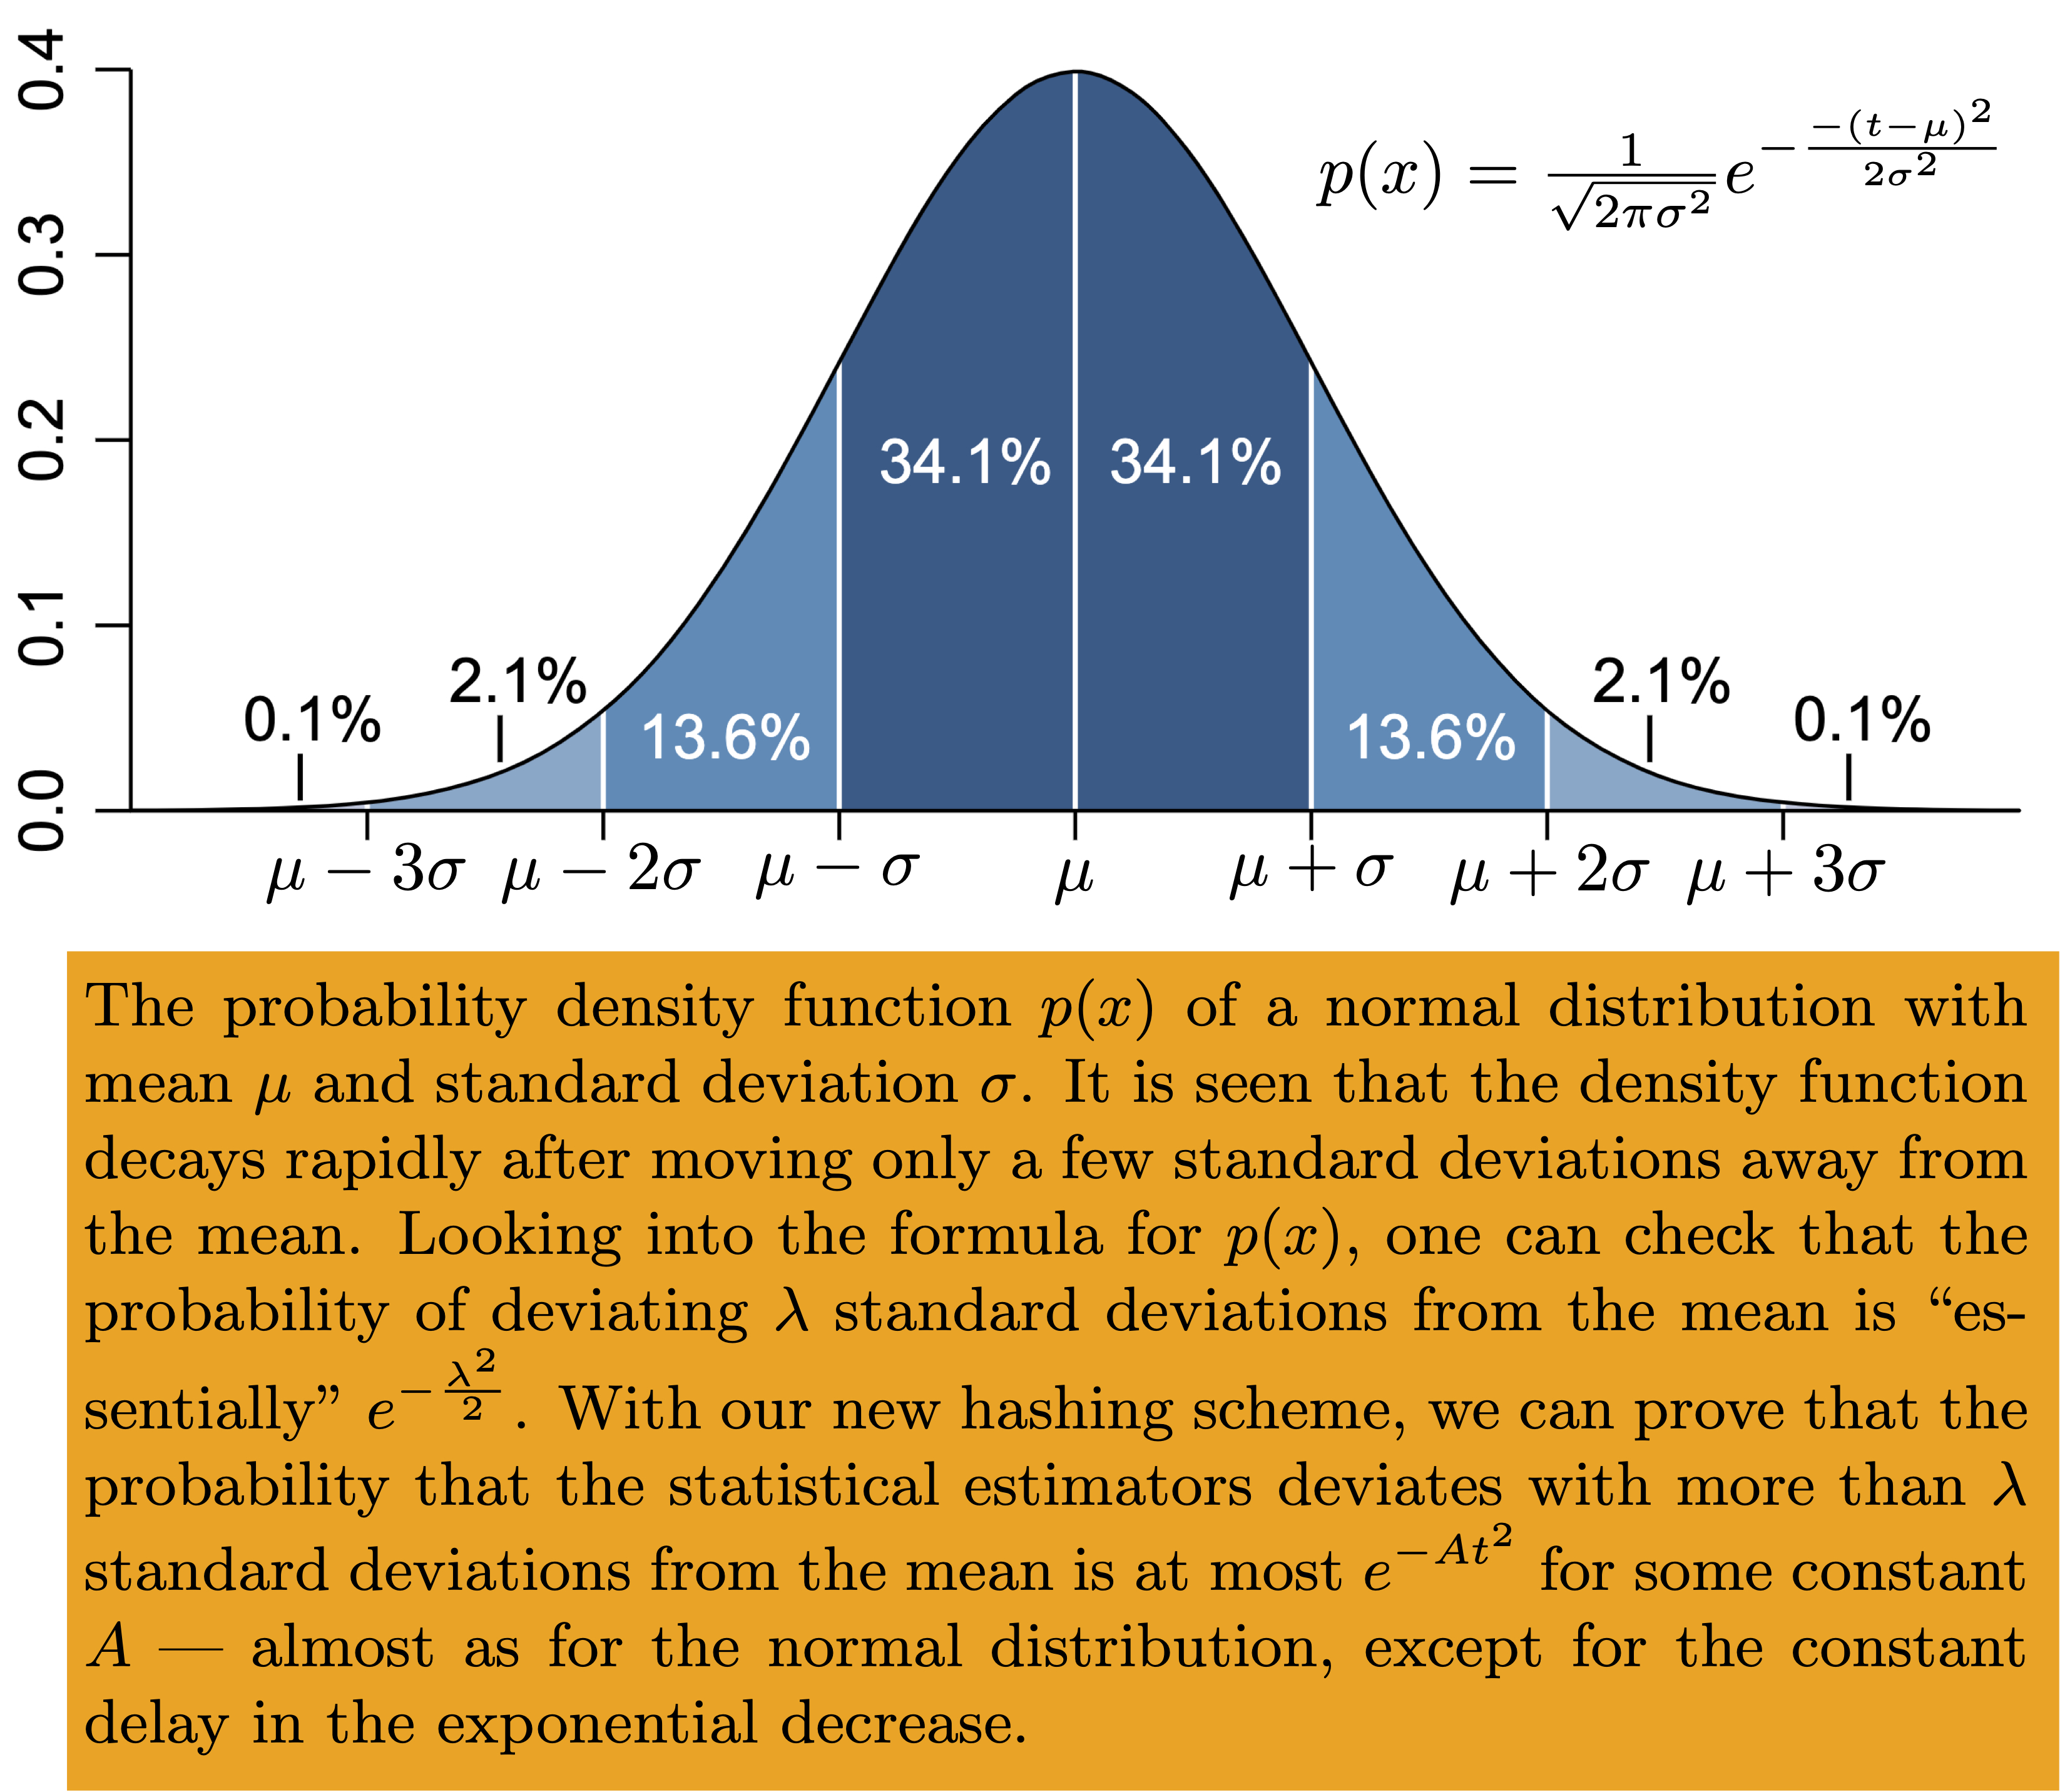 hashing for strong concentration bell curve 